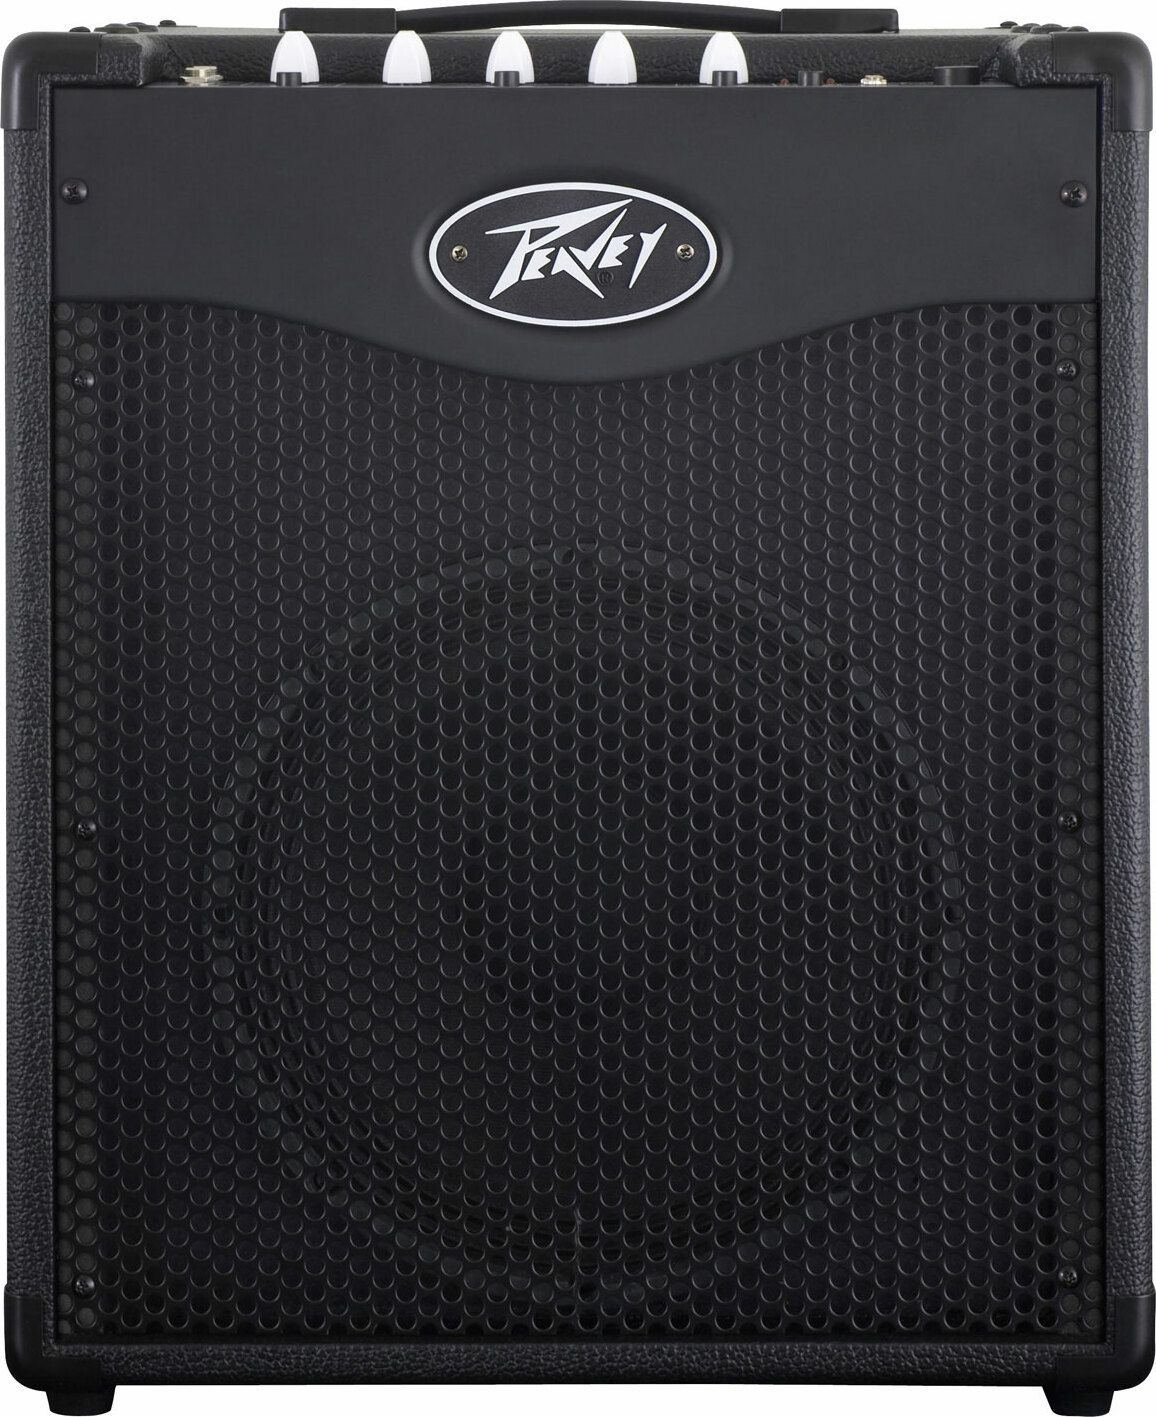 Peavey Max 112 200w 1x12 Black - Bass combo amp - Main picture